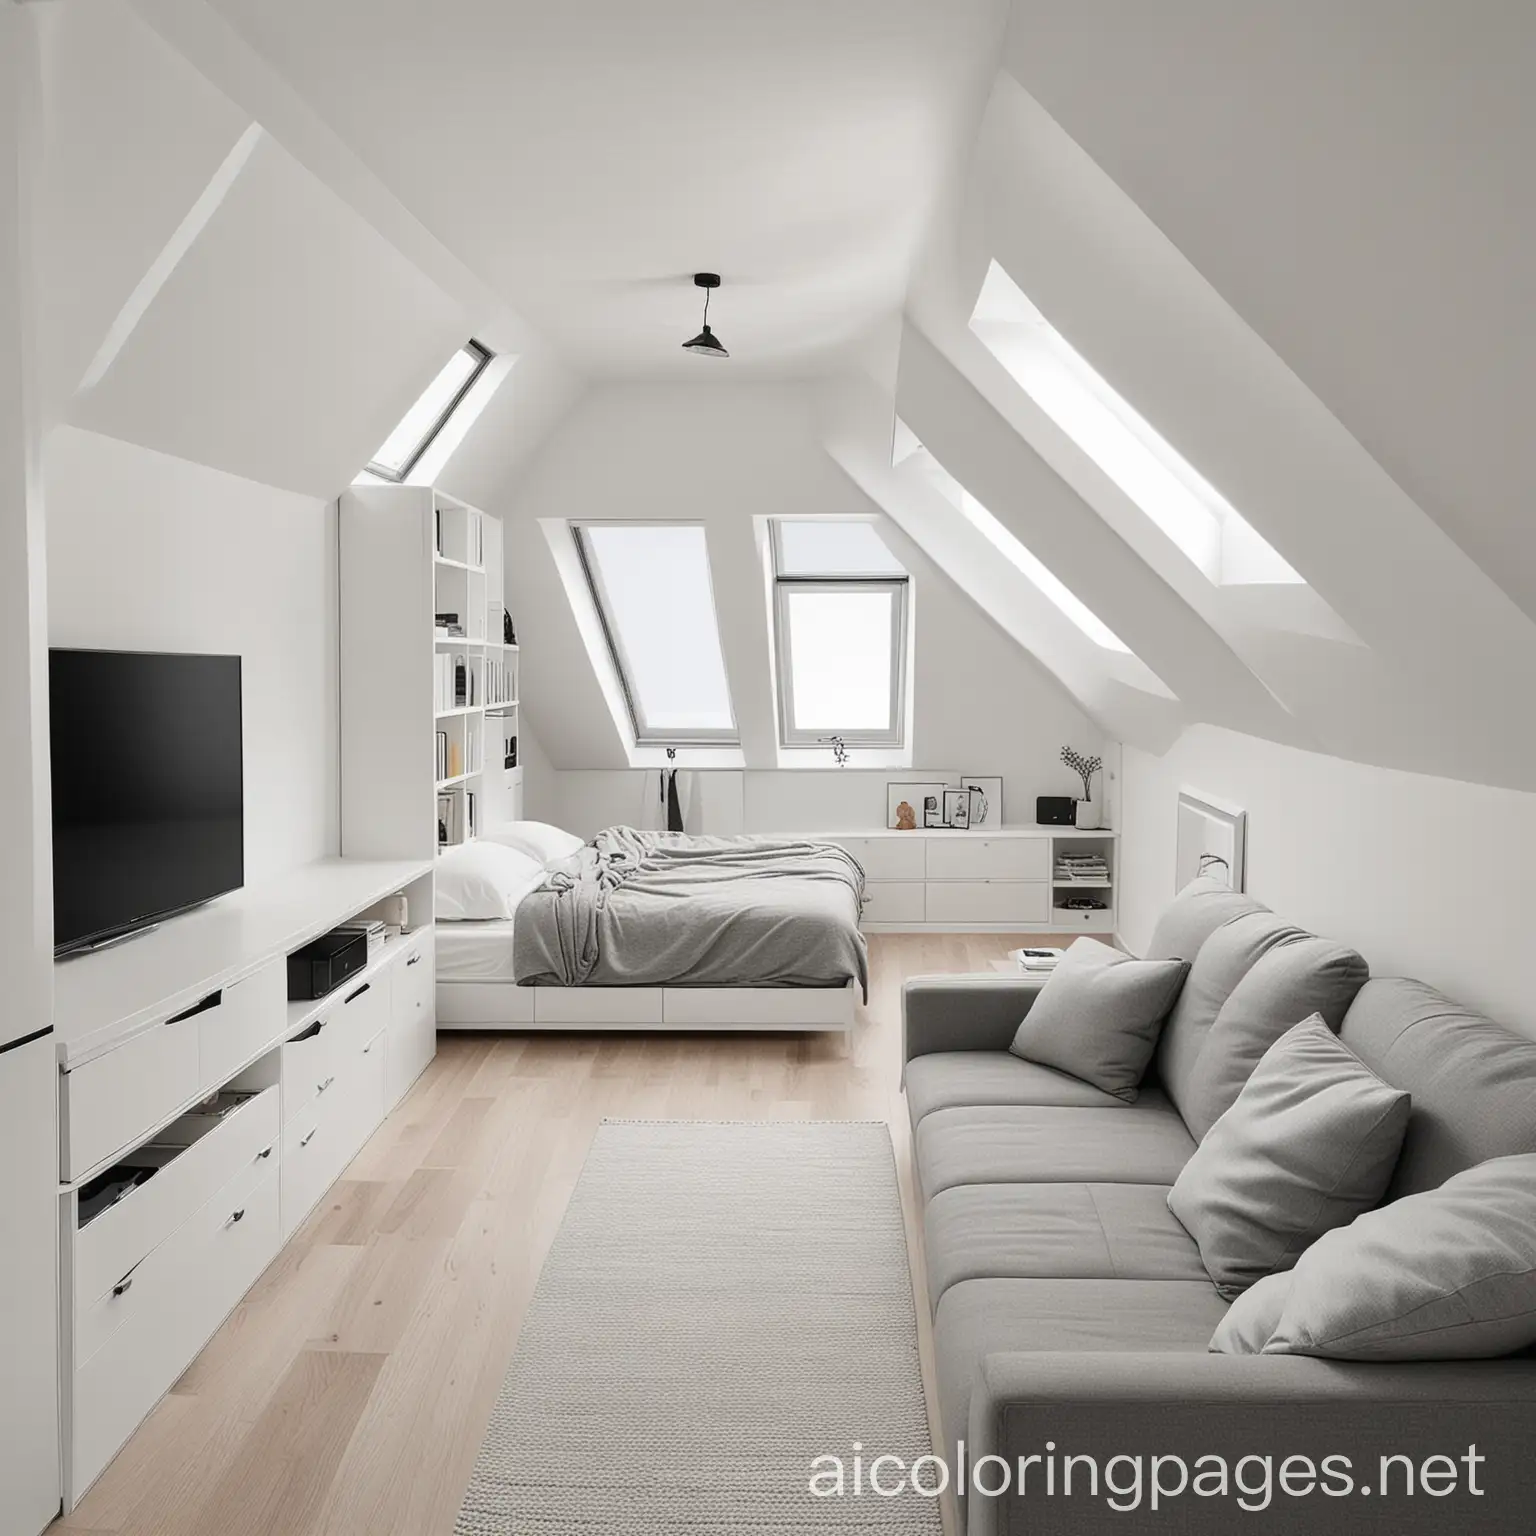 A framed attic bedroom, king sized low bed with TV stand, wall drawers and storage cupboards, a long narrow window just below the attached ceiling. By the other side of the wall there is a clothing cupboard with sliding door. Couch by the stairs going down. , Coloring Page, black and white, line art, white background, Simplicity, Ample White Space. The background of the coloring page is plain white to make it easy for young children to color within the lines. The outlines of all the subjects are easy to distinguish, making it simple for kids to color without too much difficulty